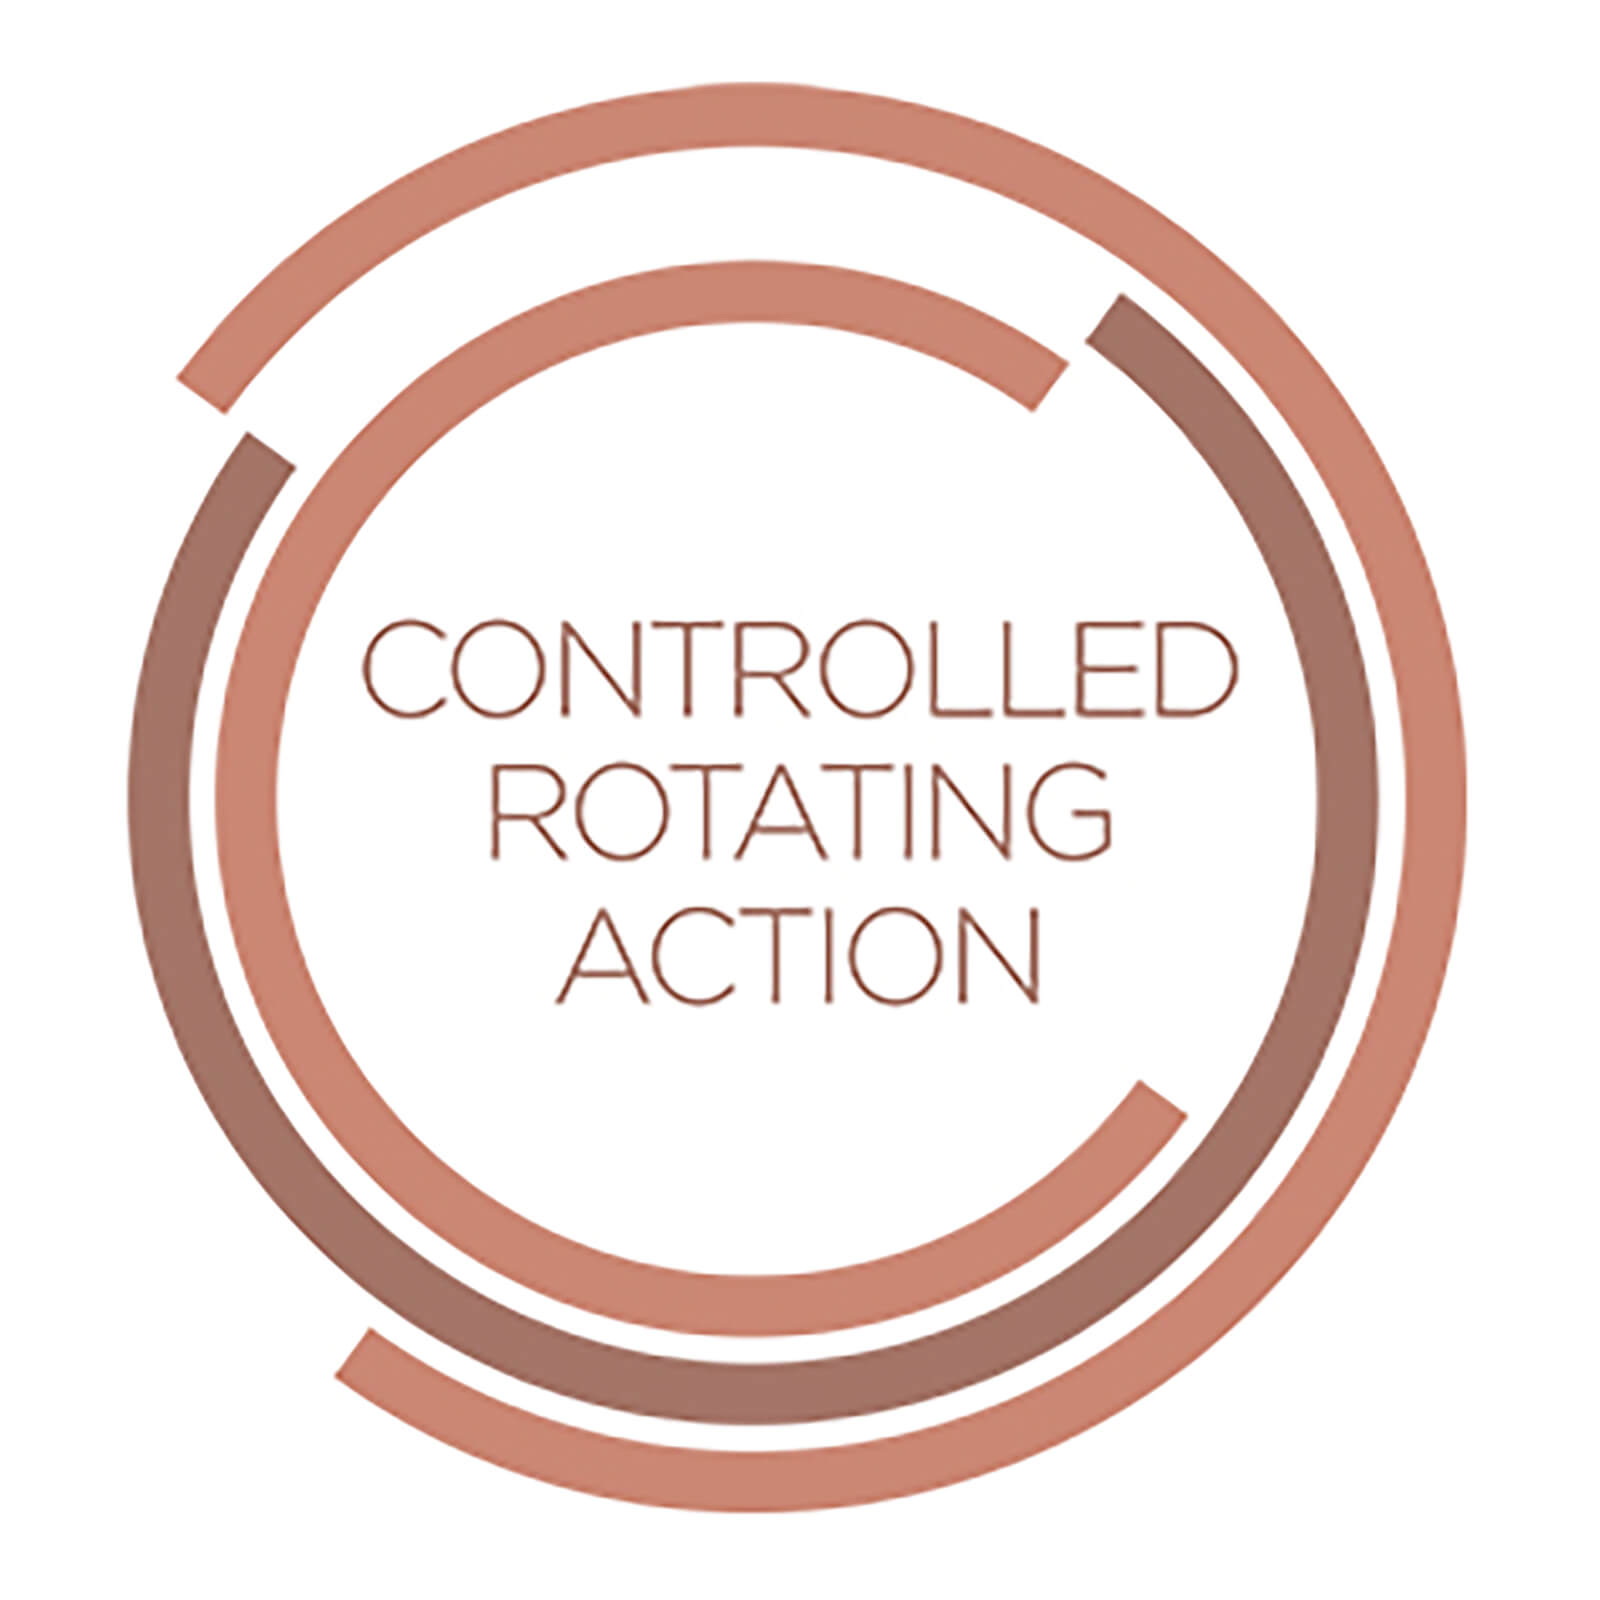 Controlled rotating action